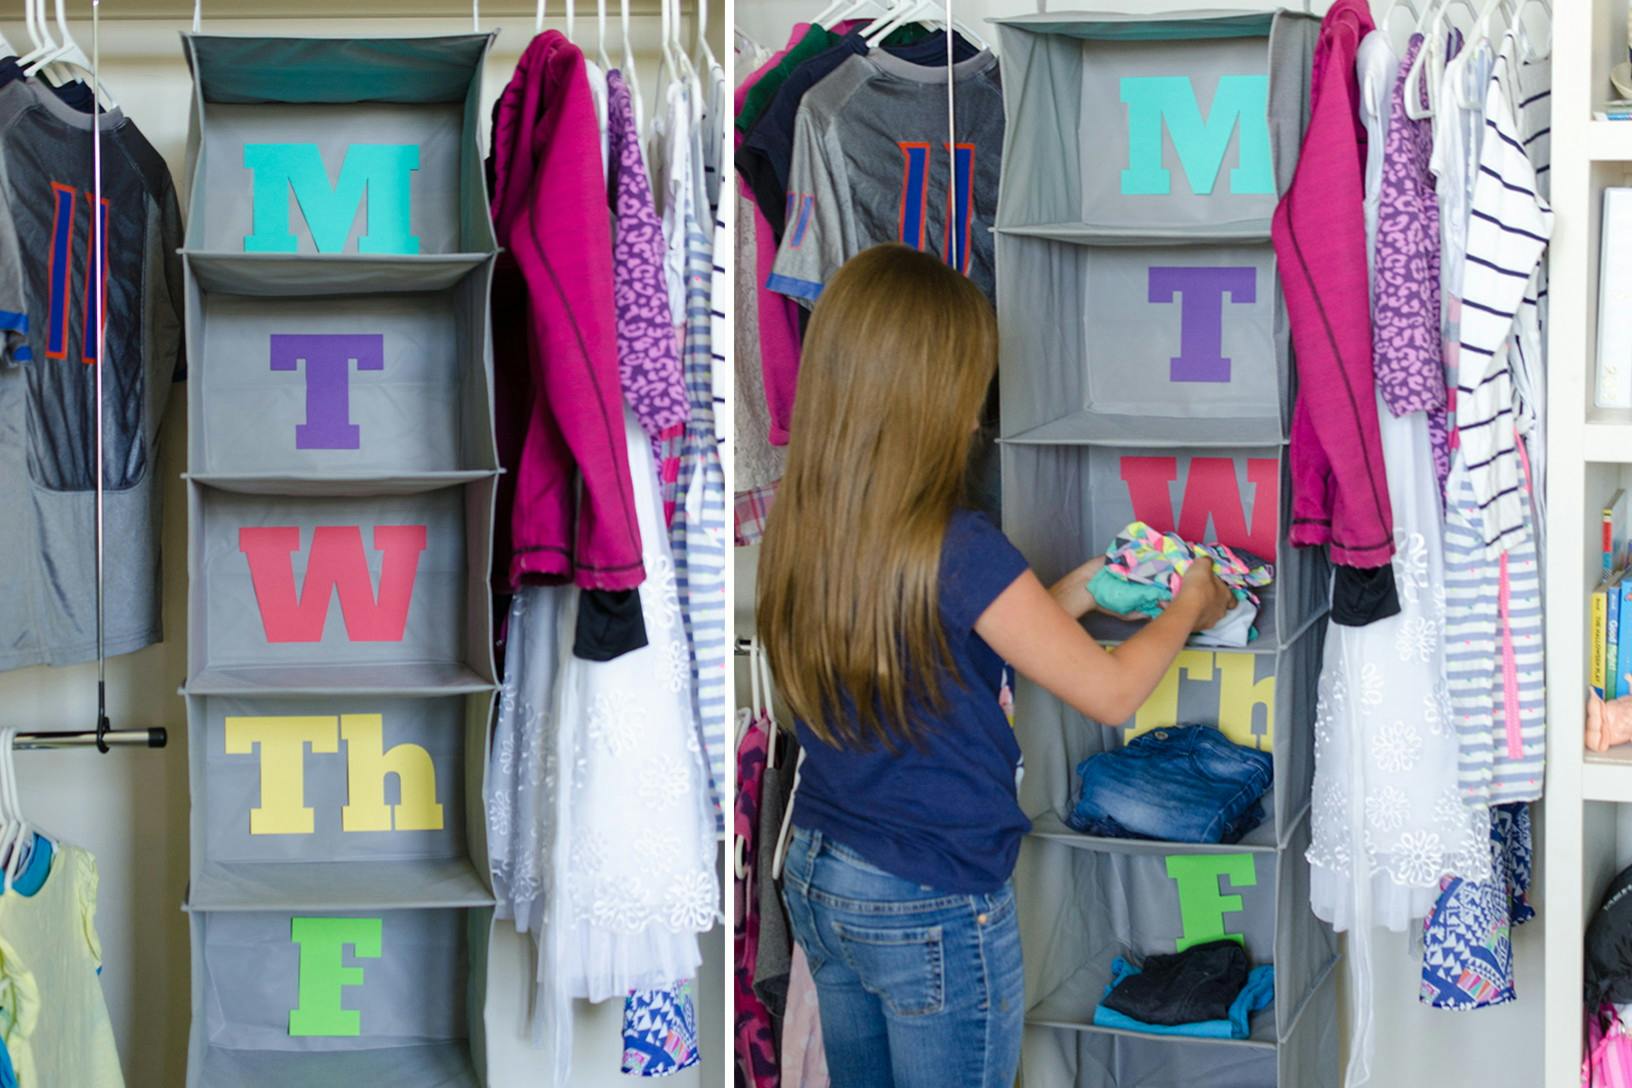 Back-to-School Solutions I'm Buying to Organize My Family of 7